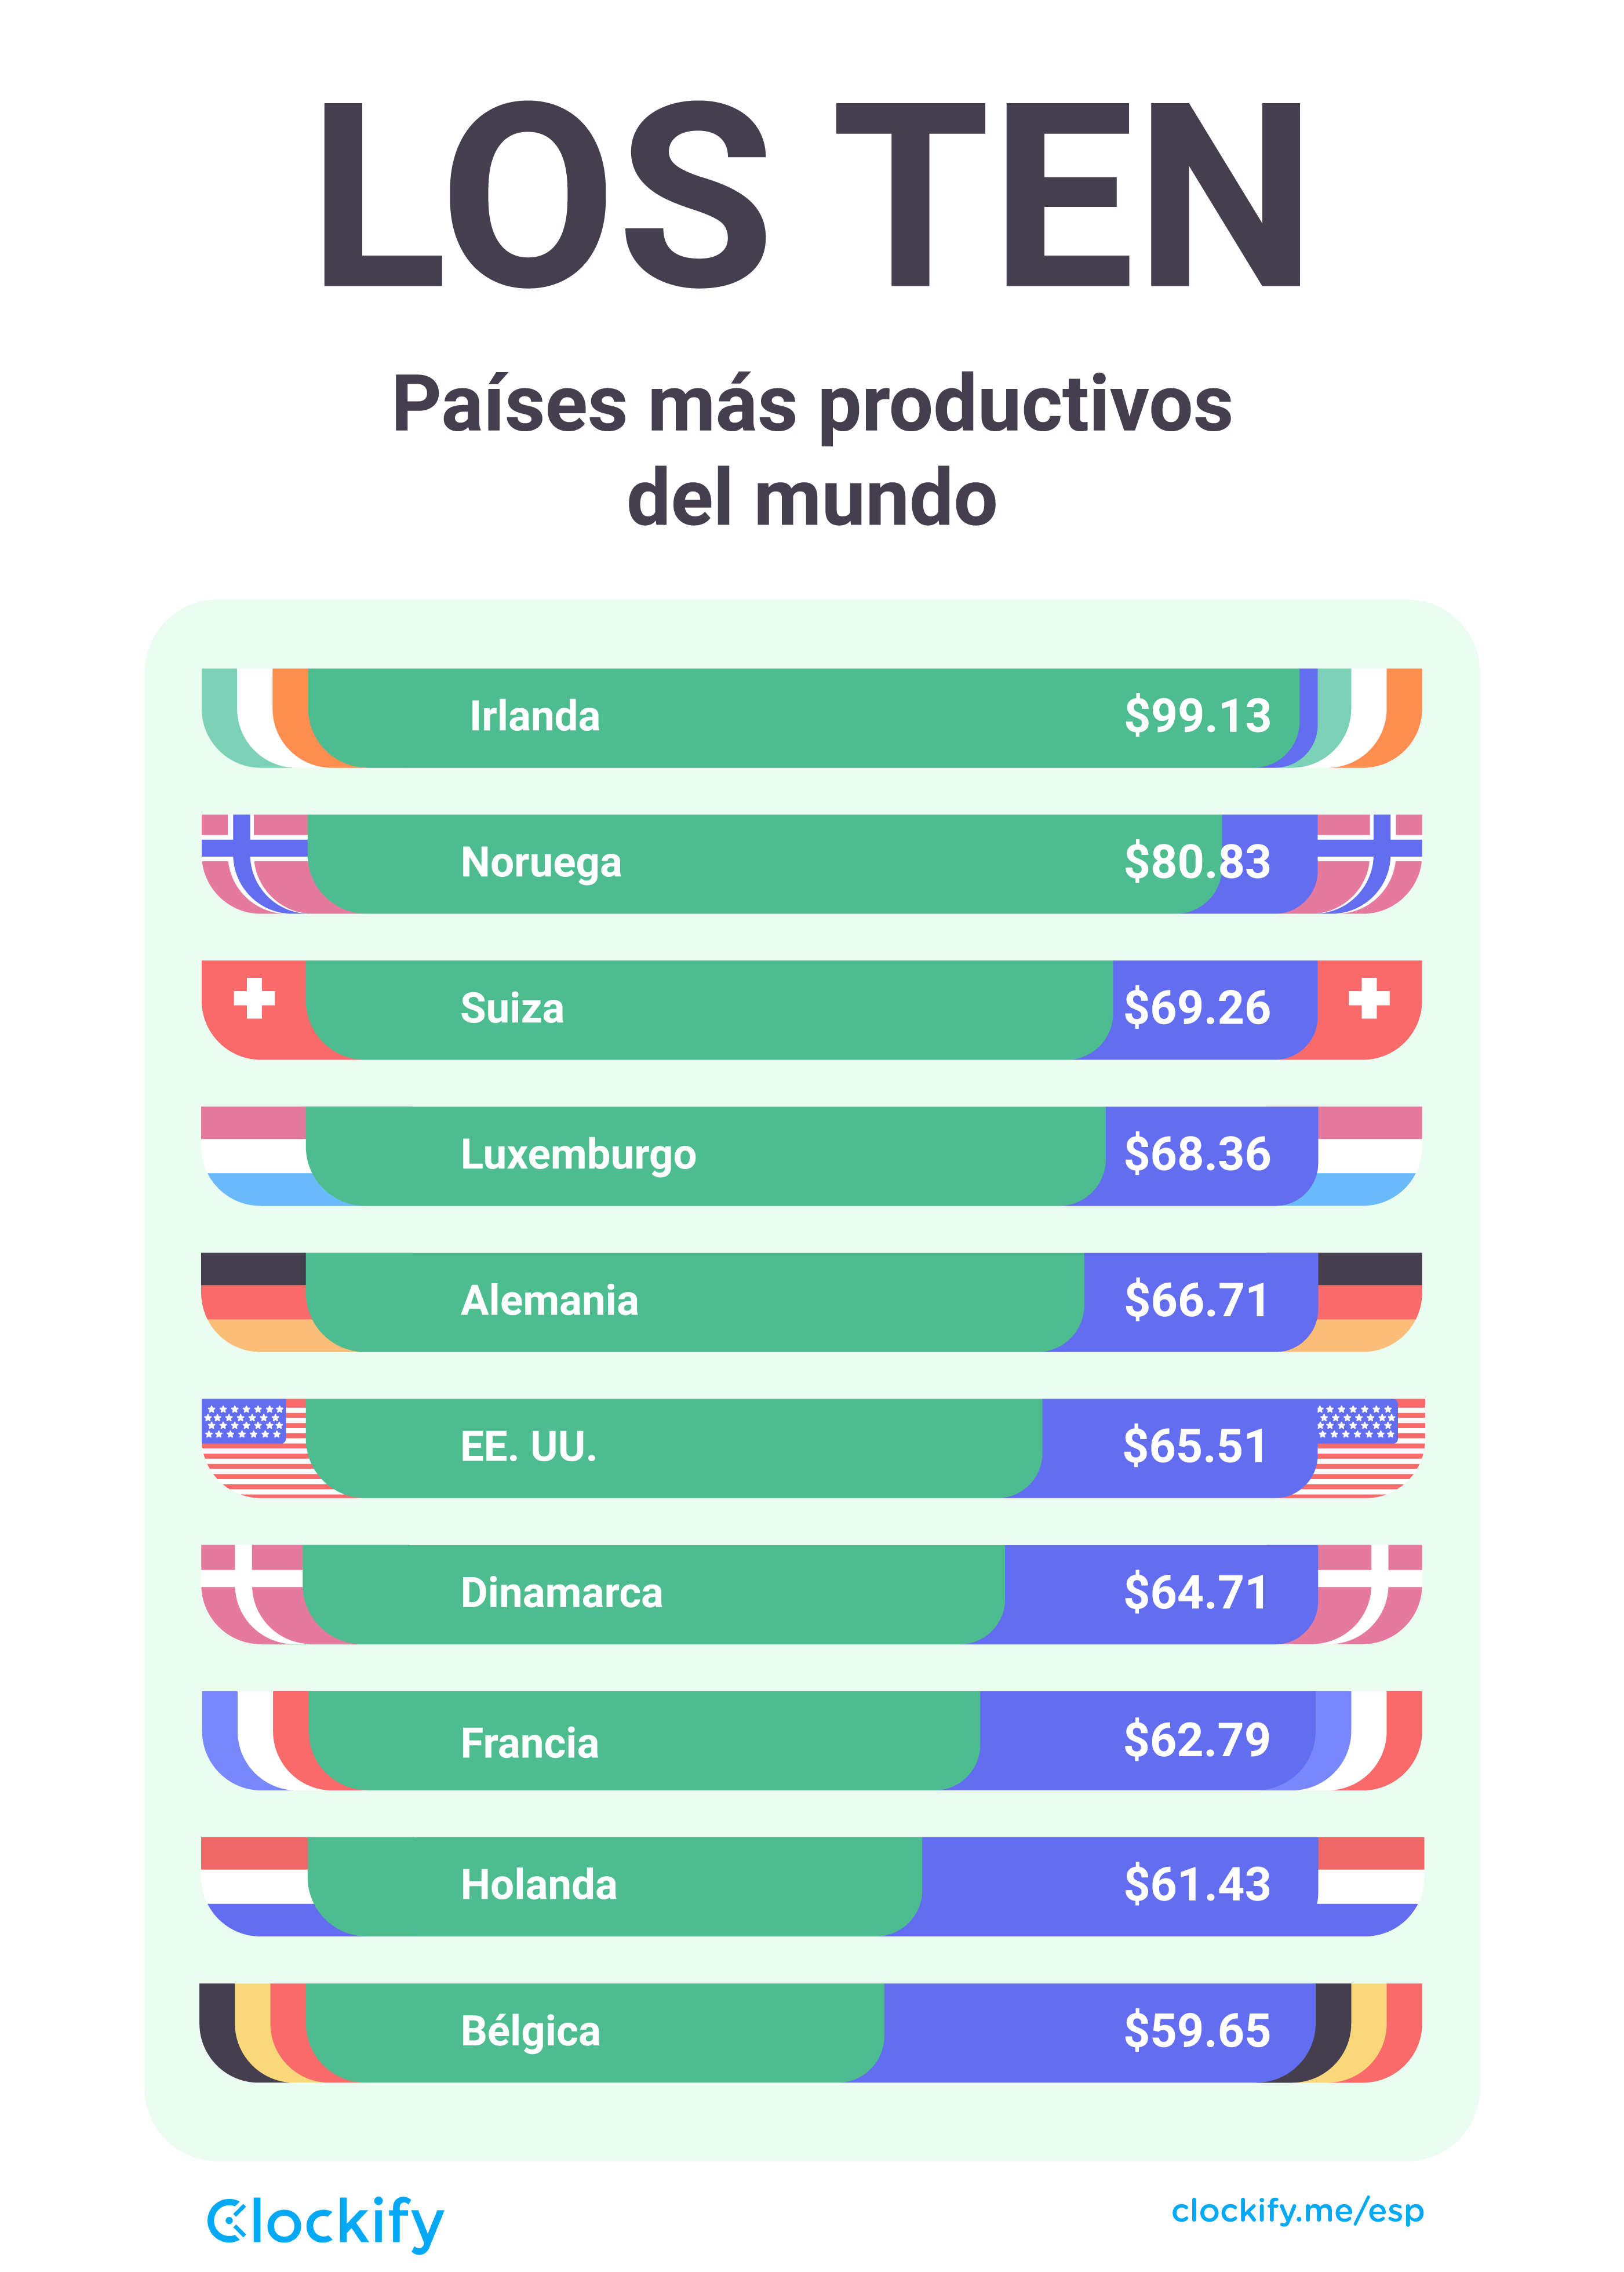 Ten most productive countries